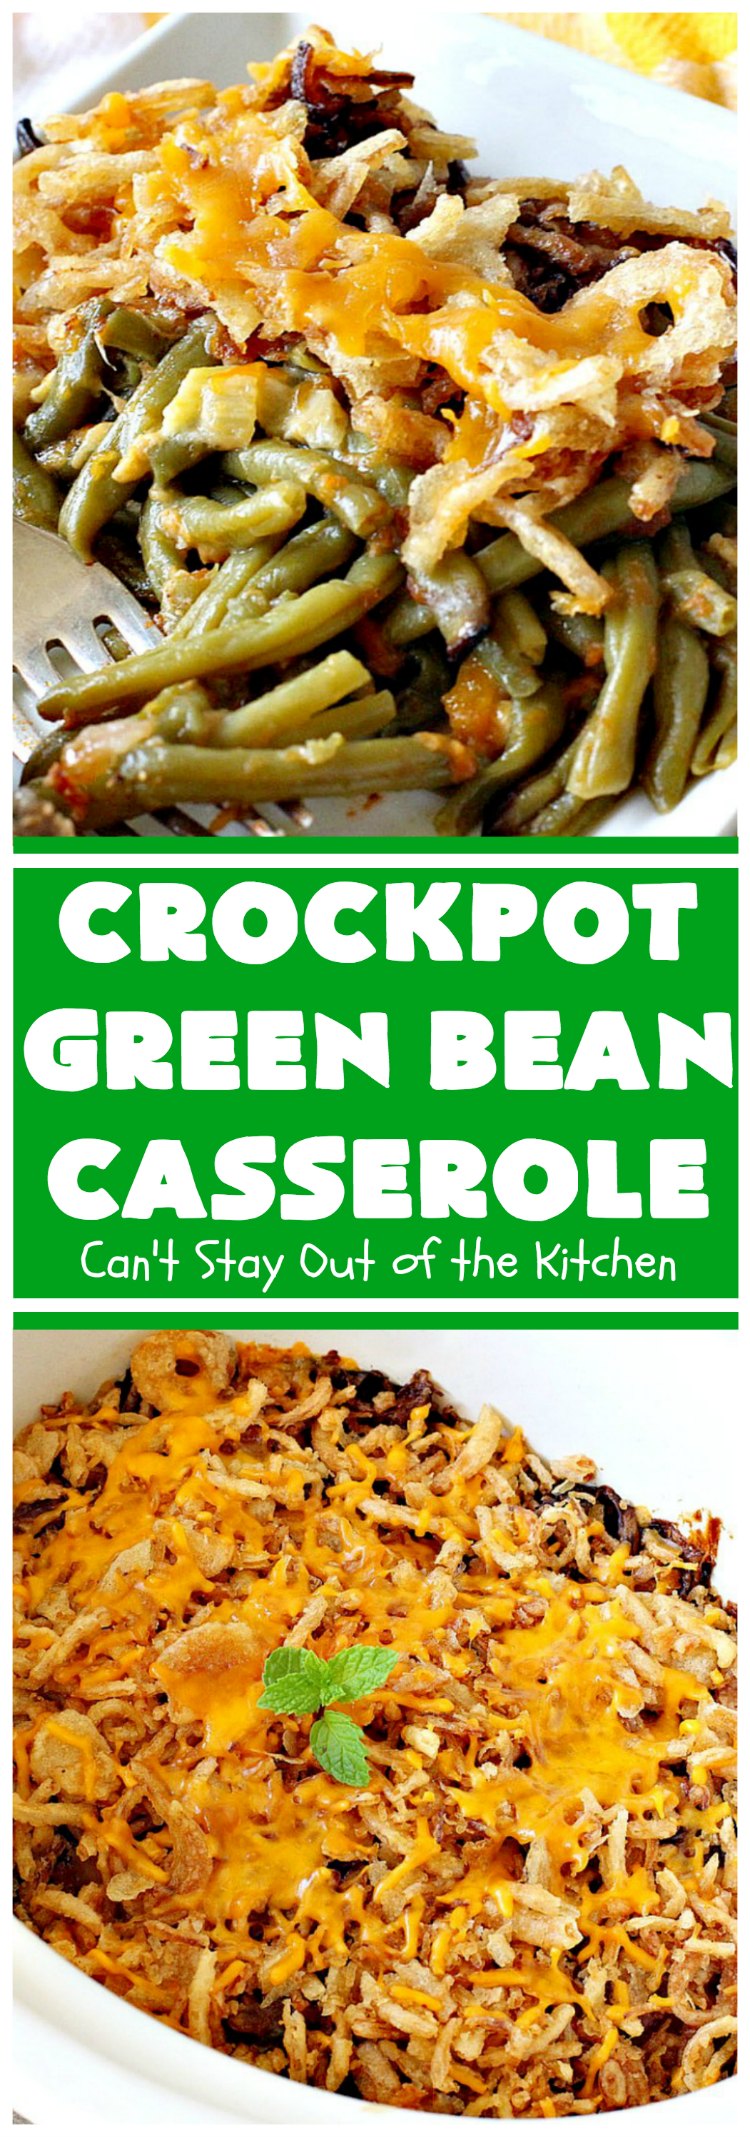 Crockpot Green Bean Casserole | Can't Stay Out of the Kitchen